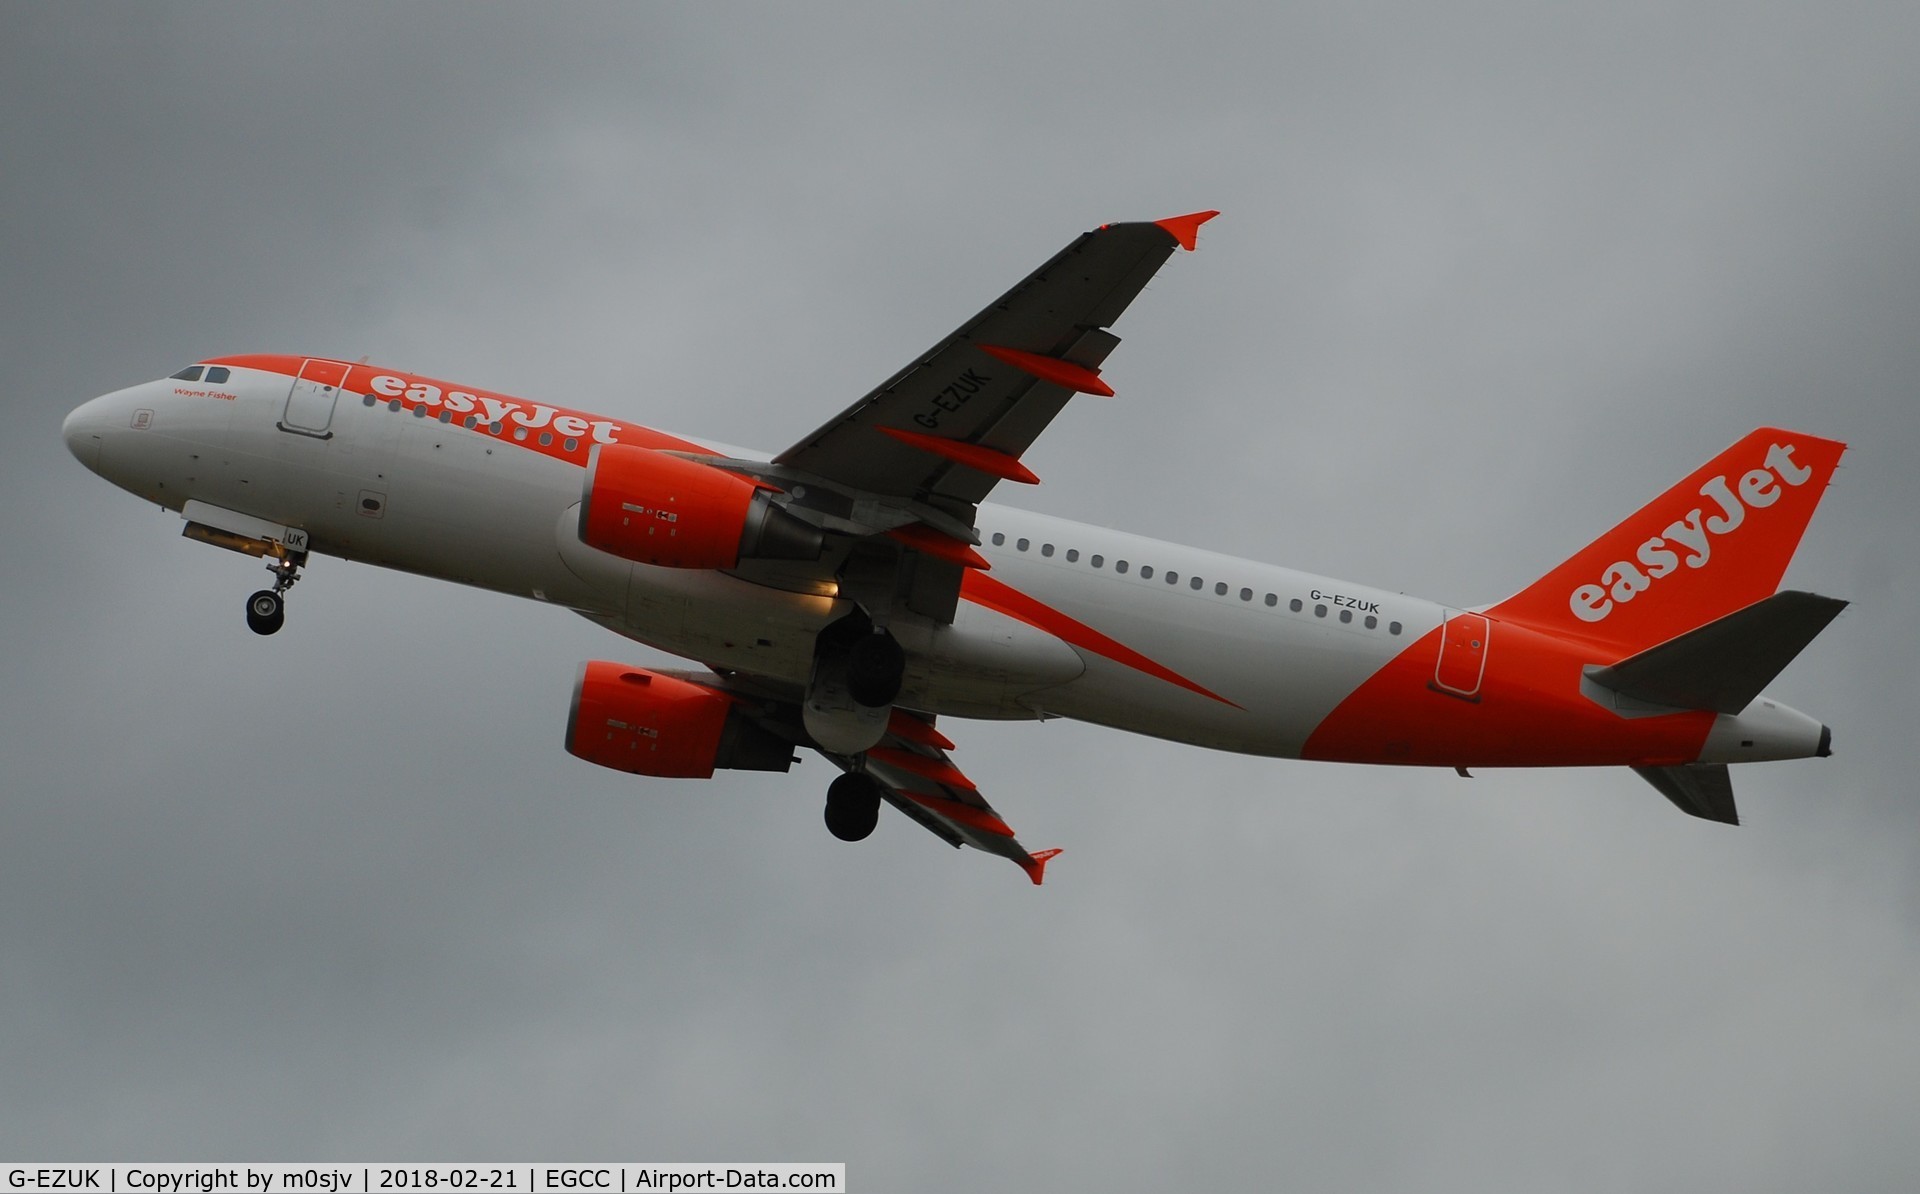 G-EZUK, 2011 Airbus A320-214 C/N 4749, Taken from the Airport Pub